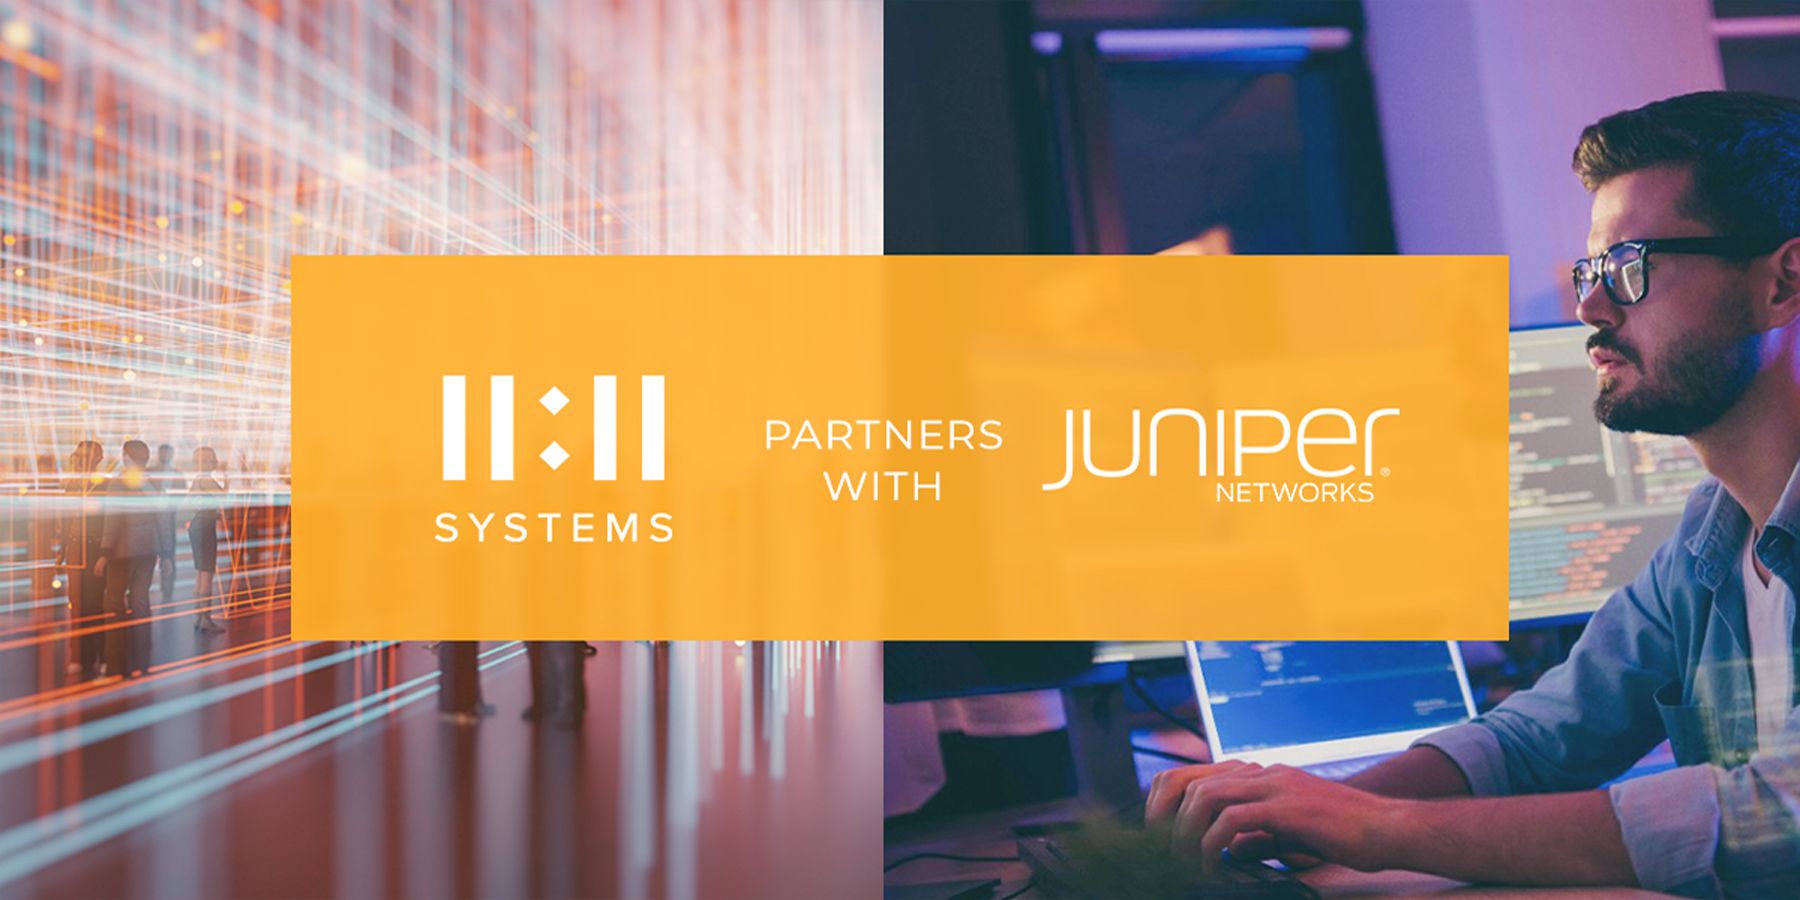 Welcoming Our Newest Partner: 11:11 Systems